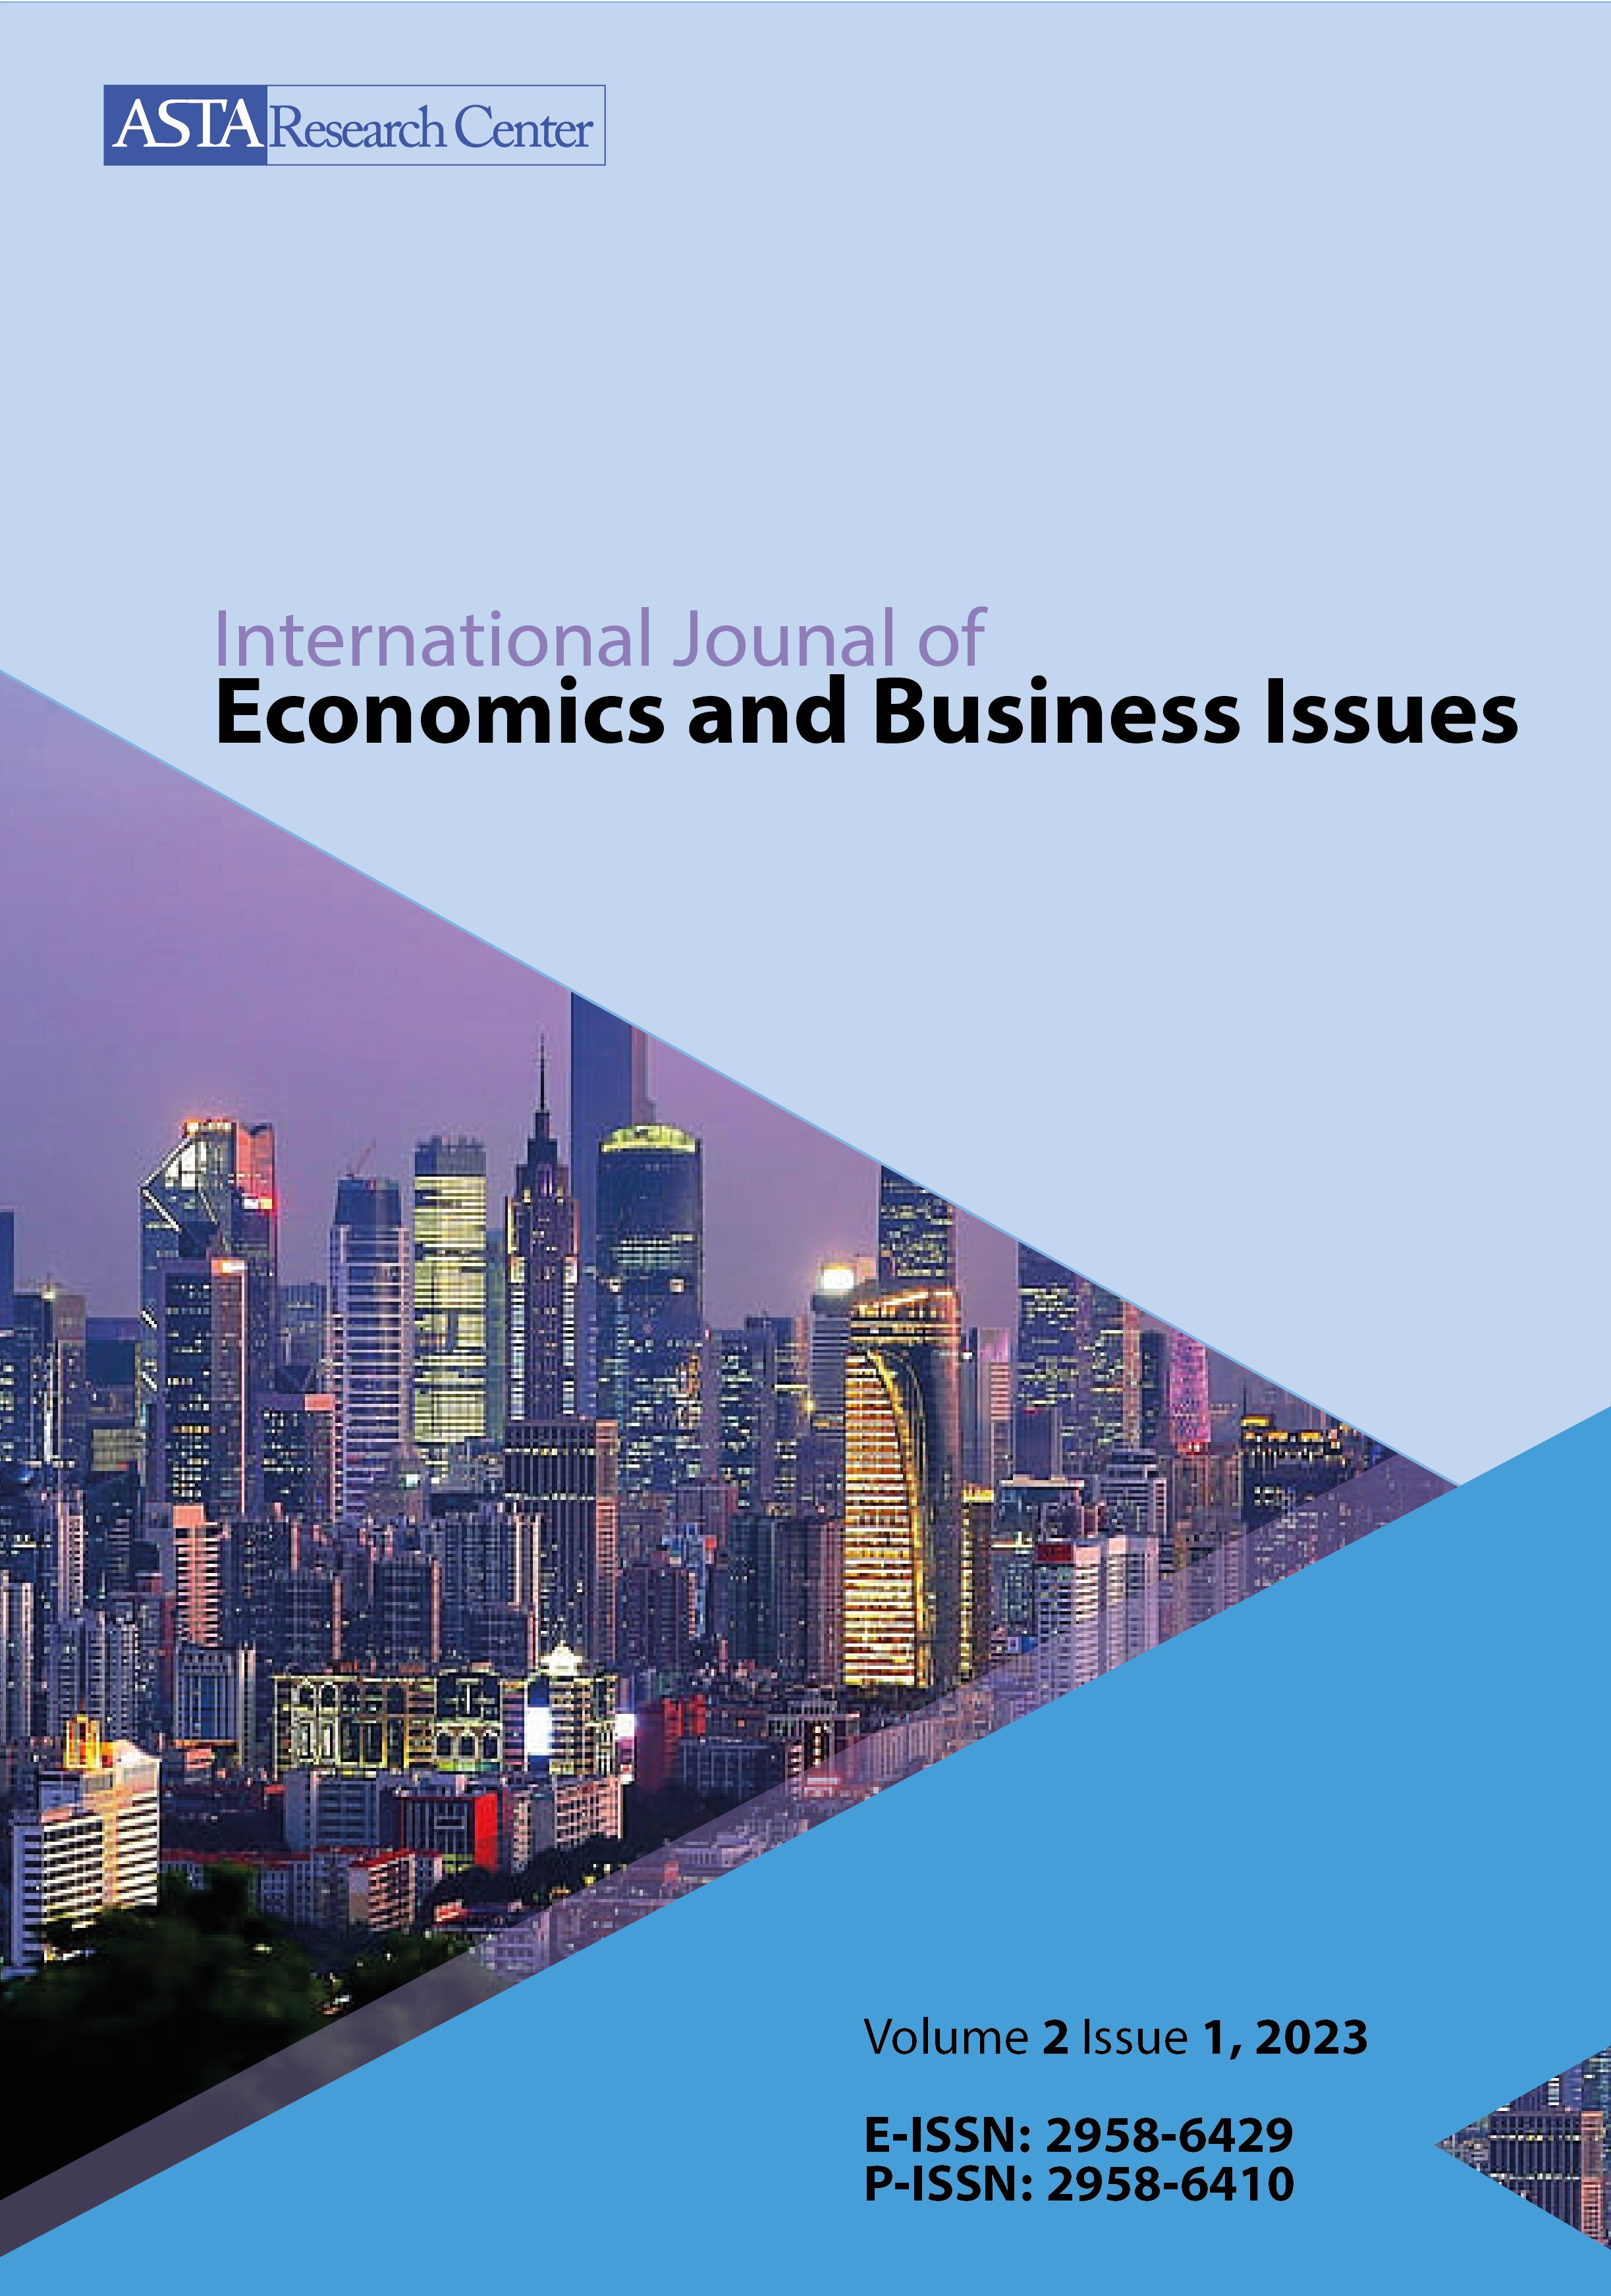 					View Vol. 2 No. 1 (2023): International Journal of Economics and Business Issues
				